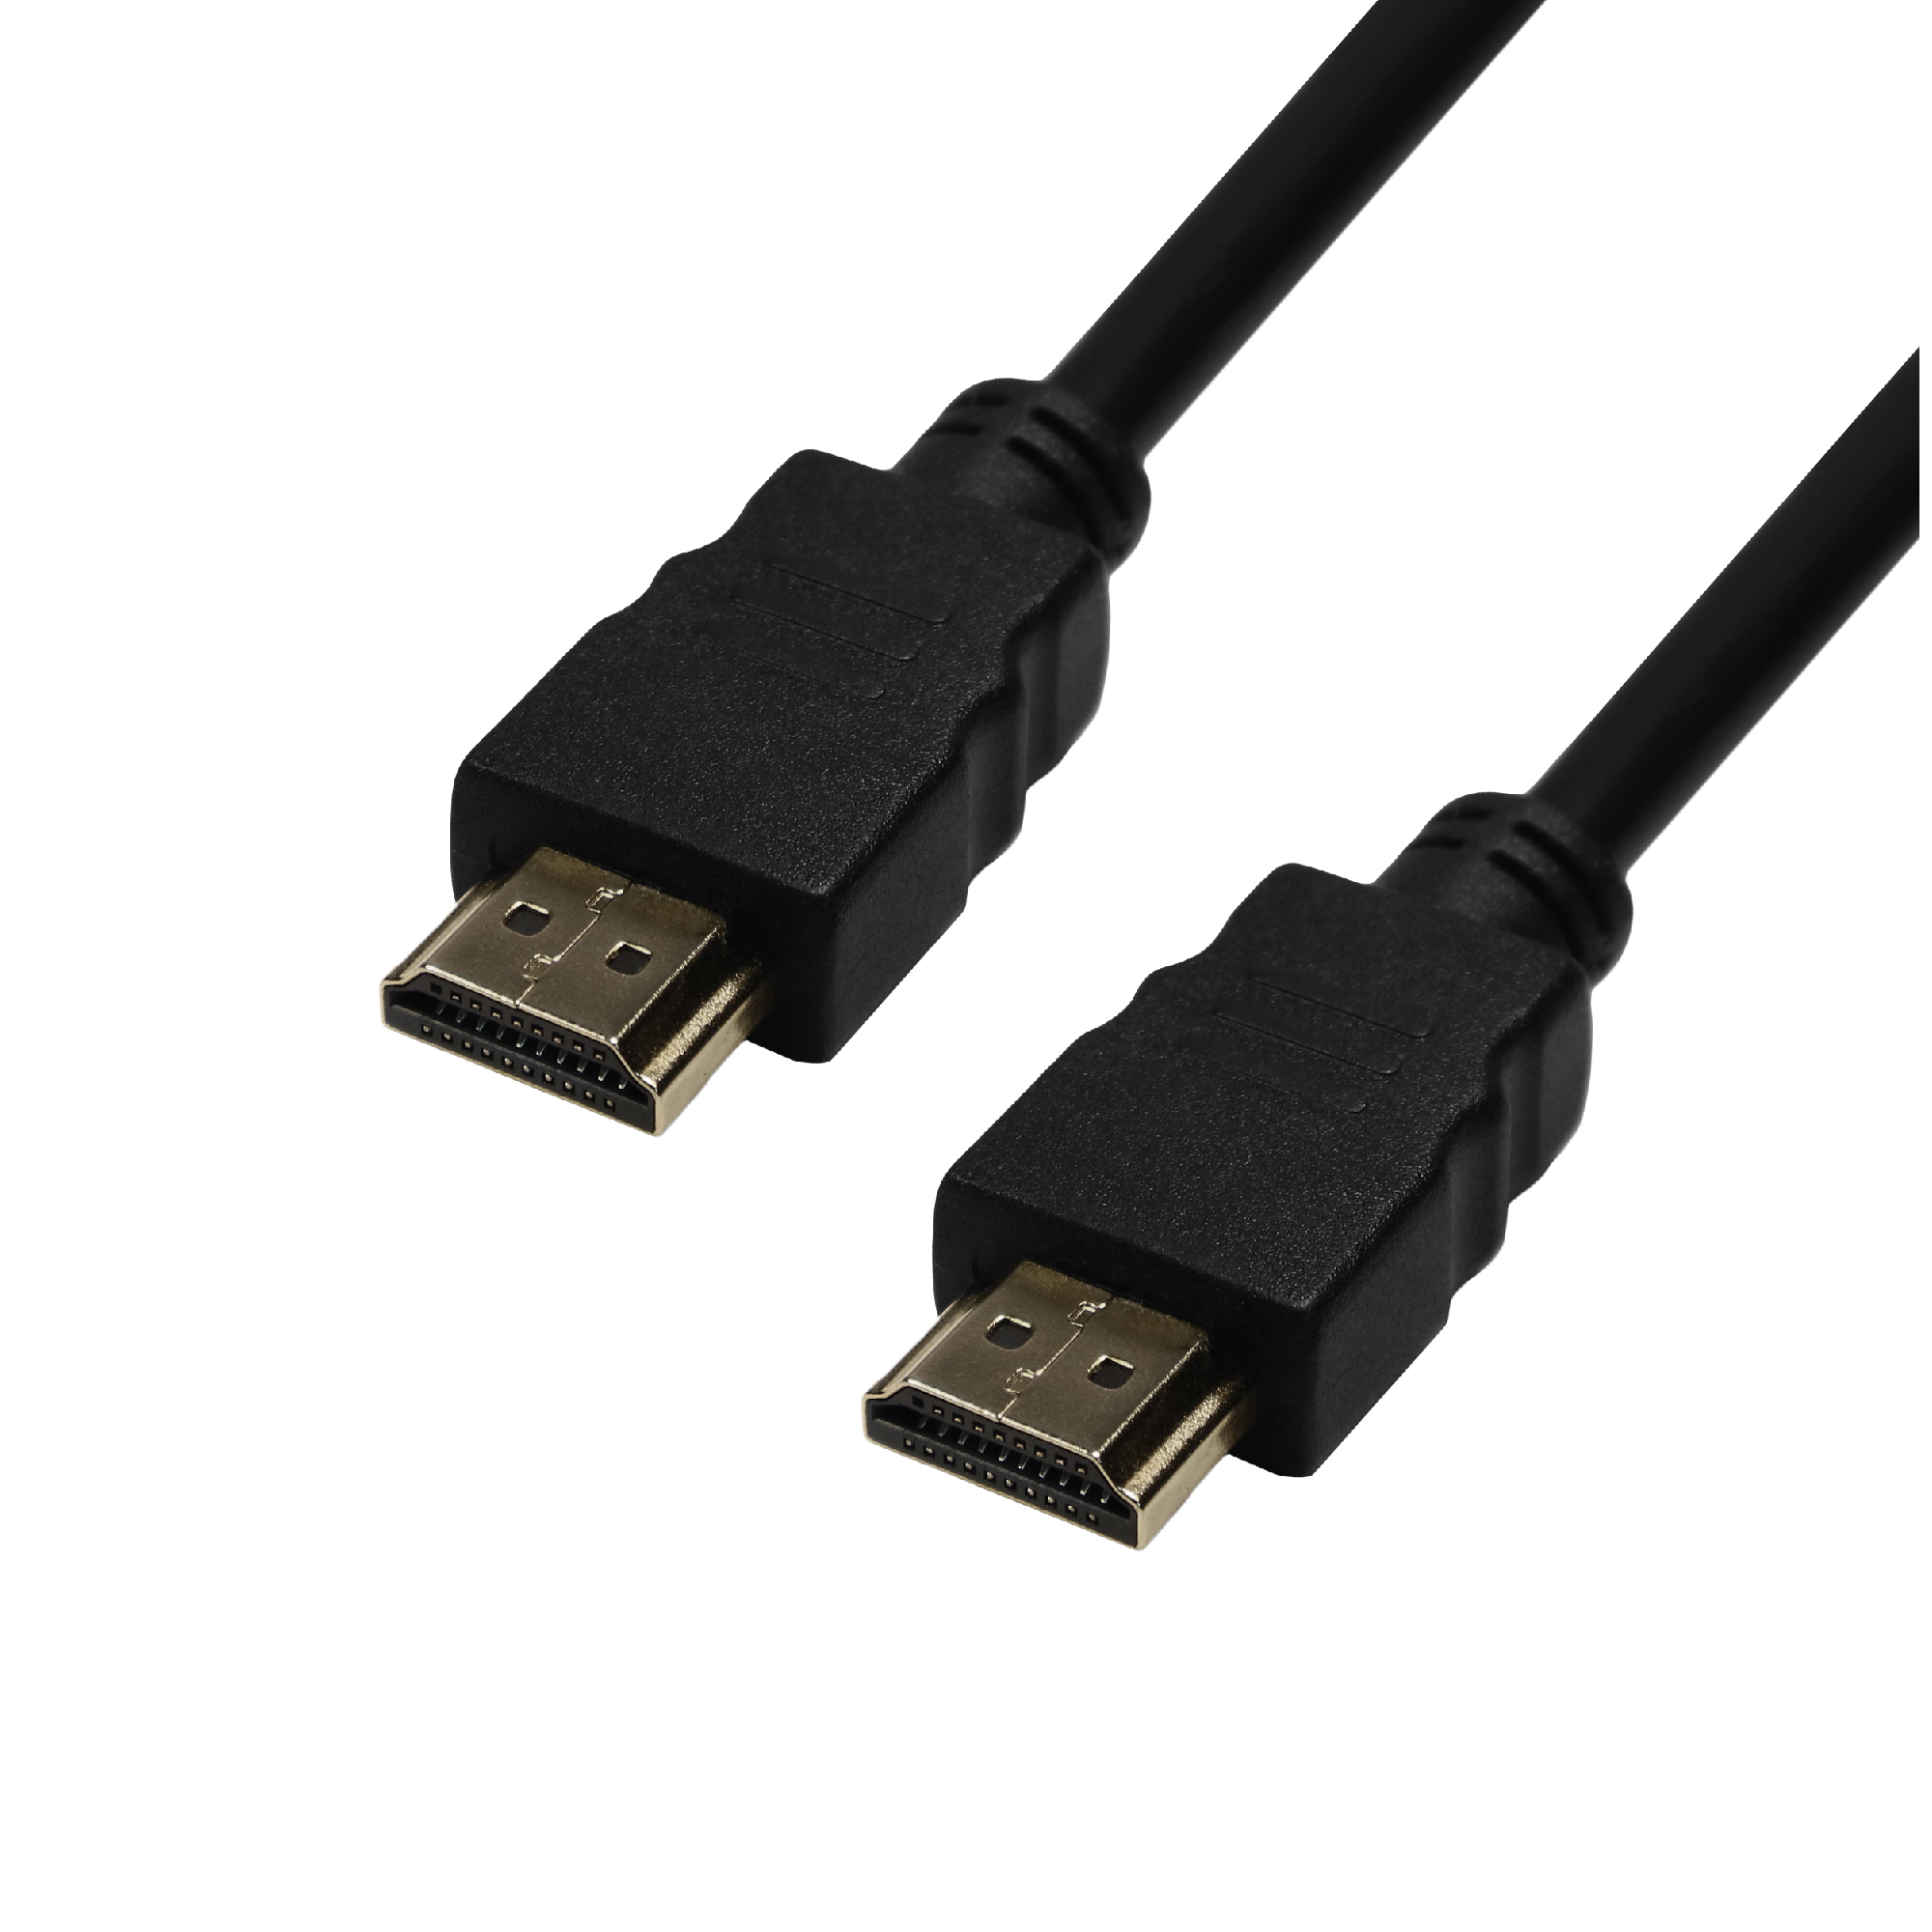 Ematic EMC60HD High-speed HDMI 1080p Cable, 6 Feet (Black) - image 1 of 3